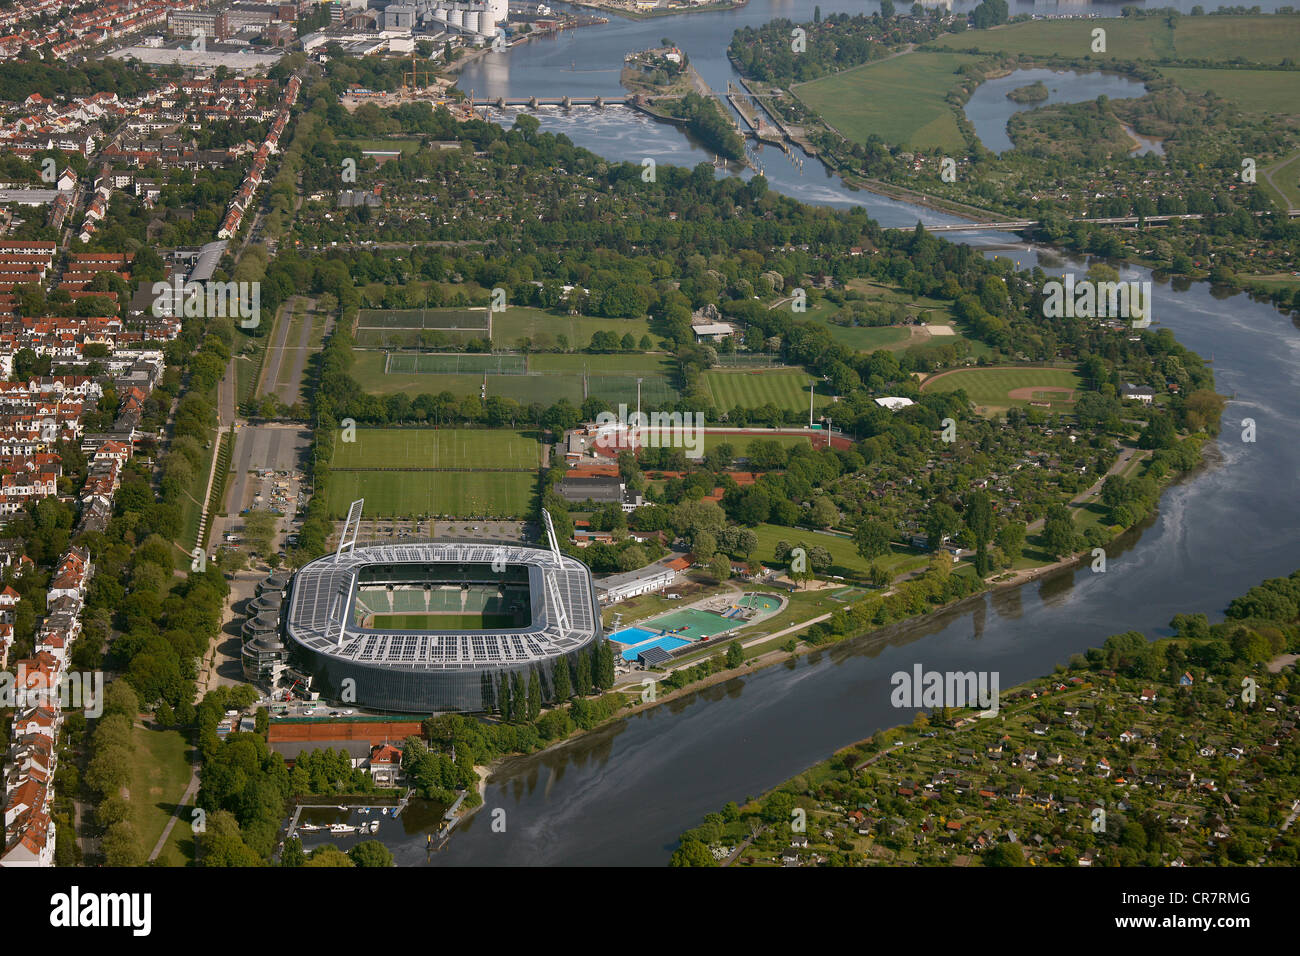 Aerial view, Weserstadion, stadium with solar panels on the roof, Weserburg Museum, Kleine Weser arm of the river, Bremen Stock Photo